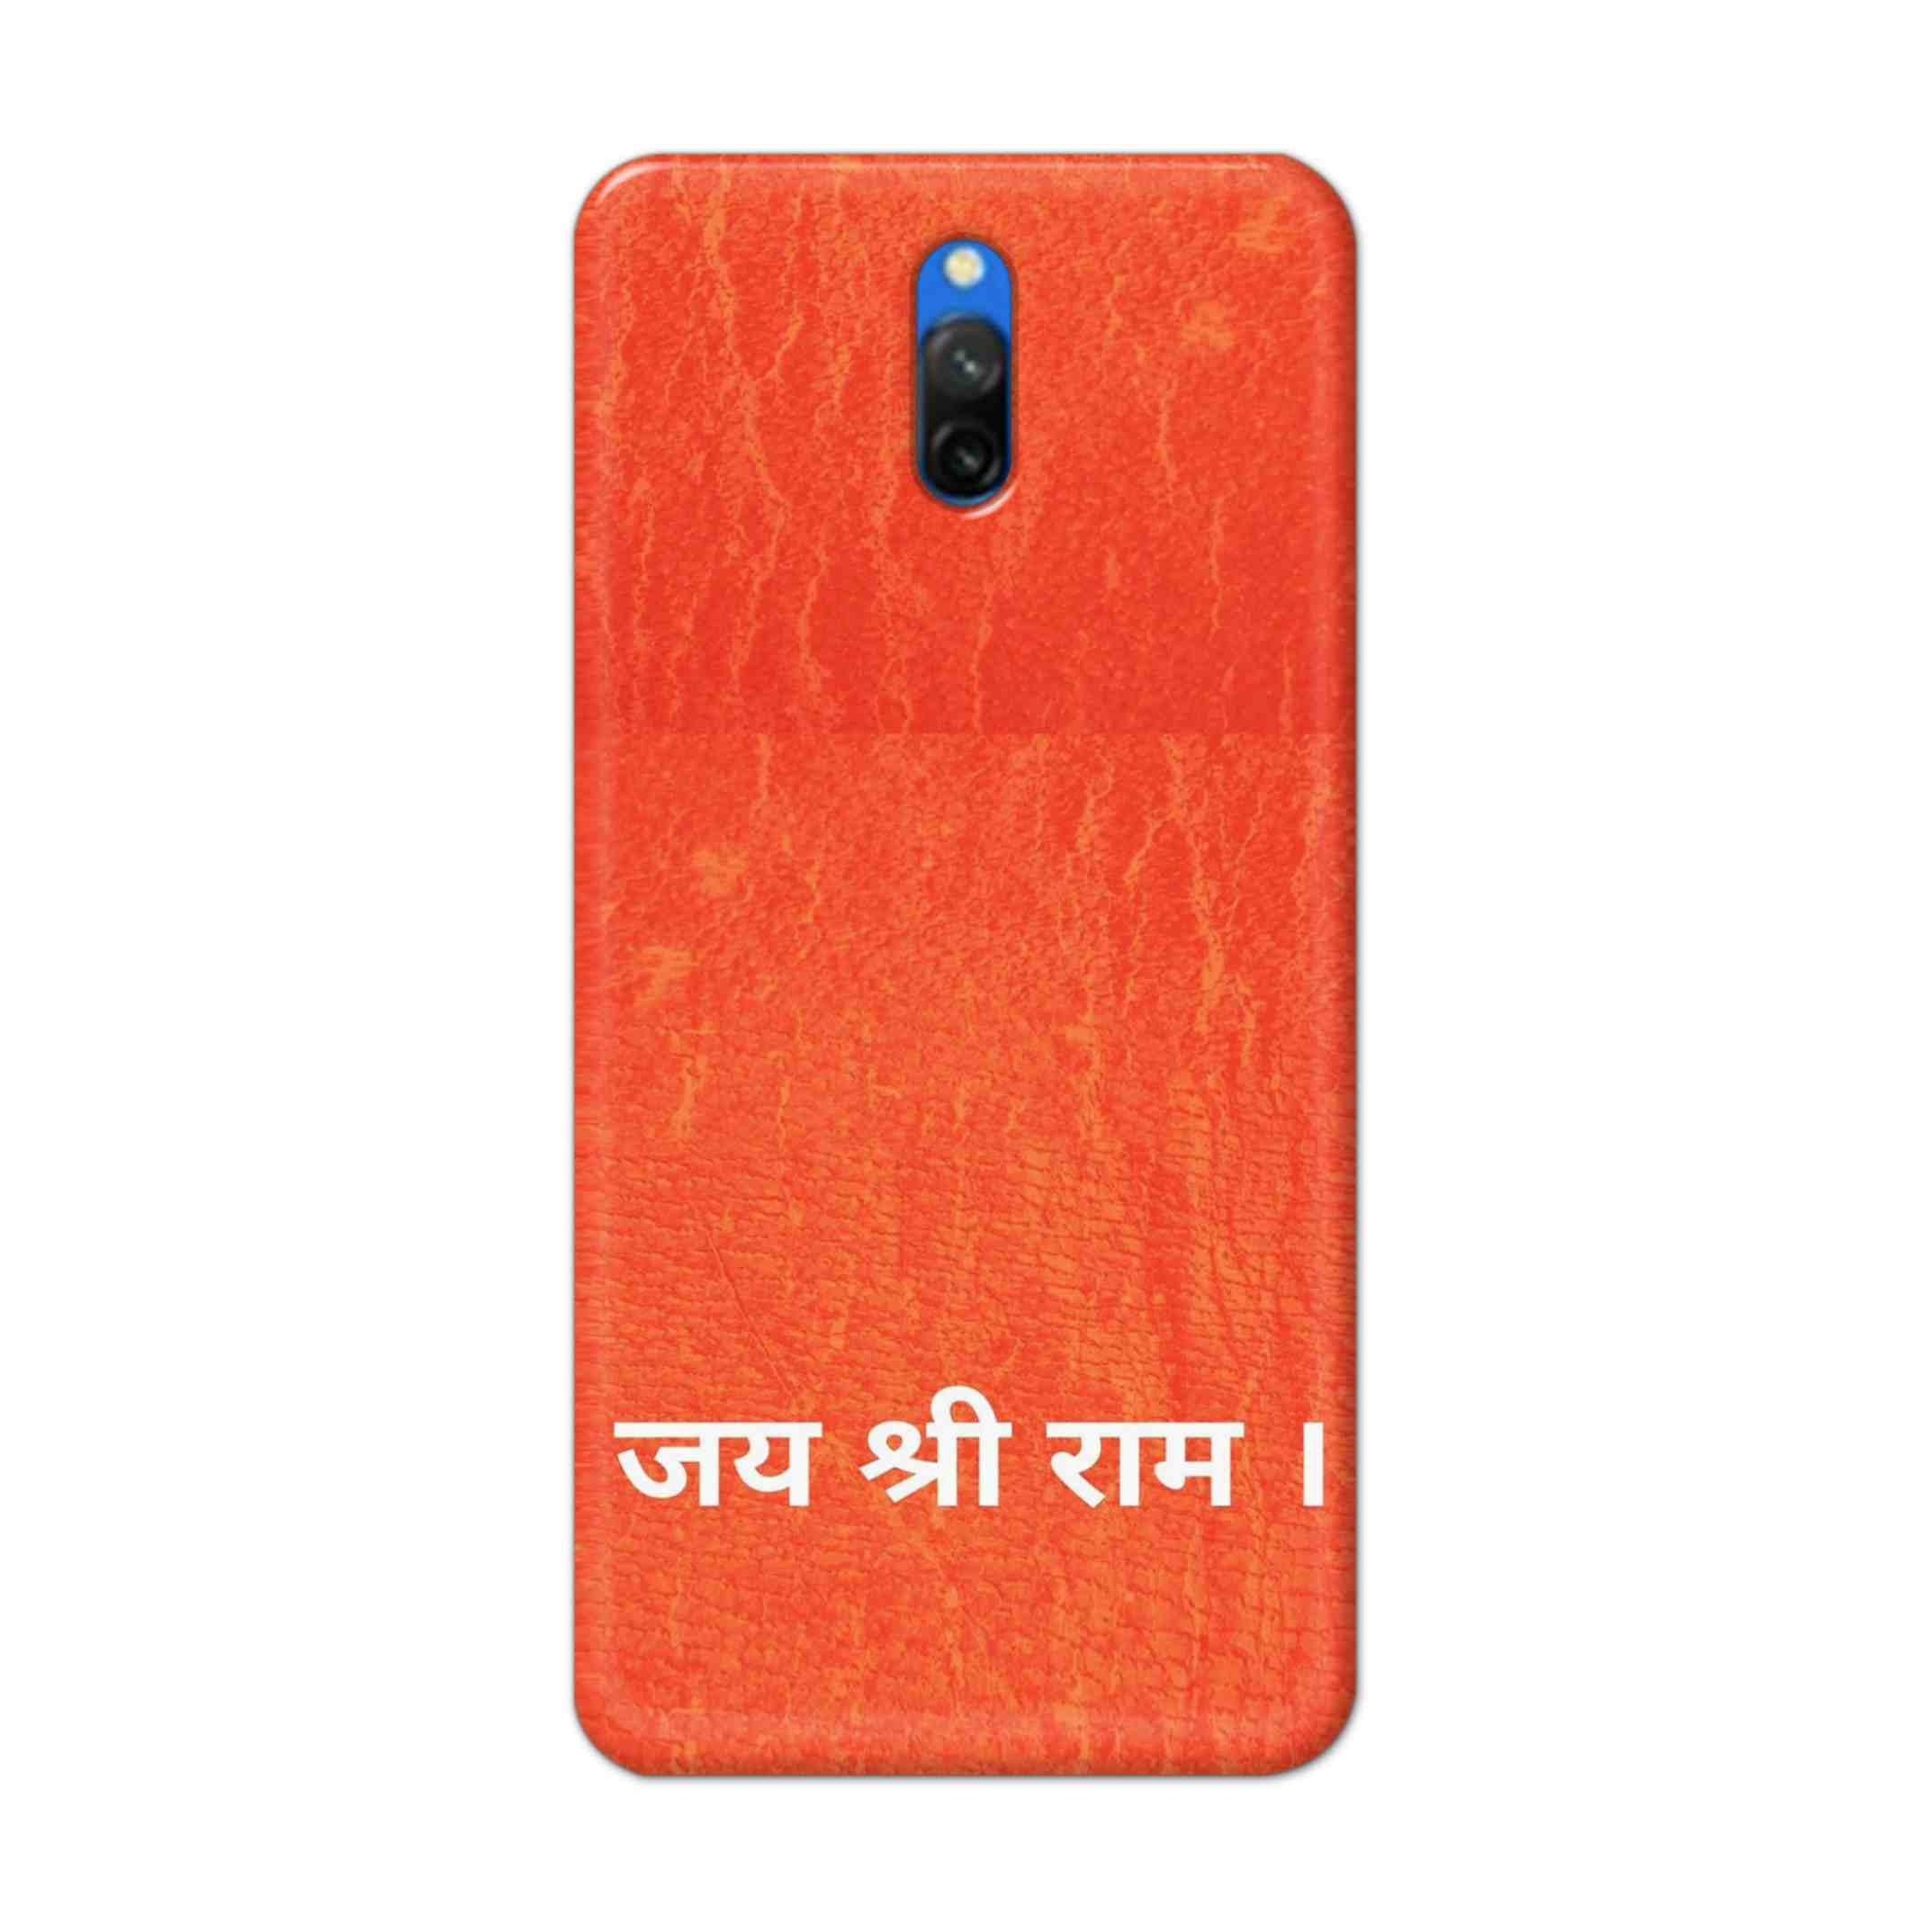 Buy Jai Shree Ram Hard Back Mobile Phone Case/Cover For Redmi 8A Dual Online